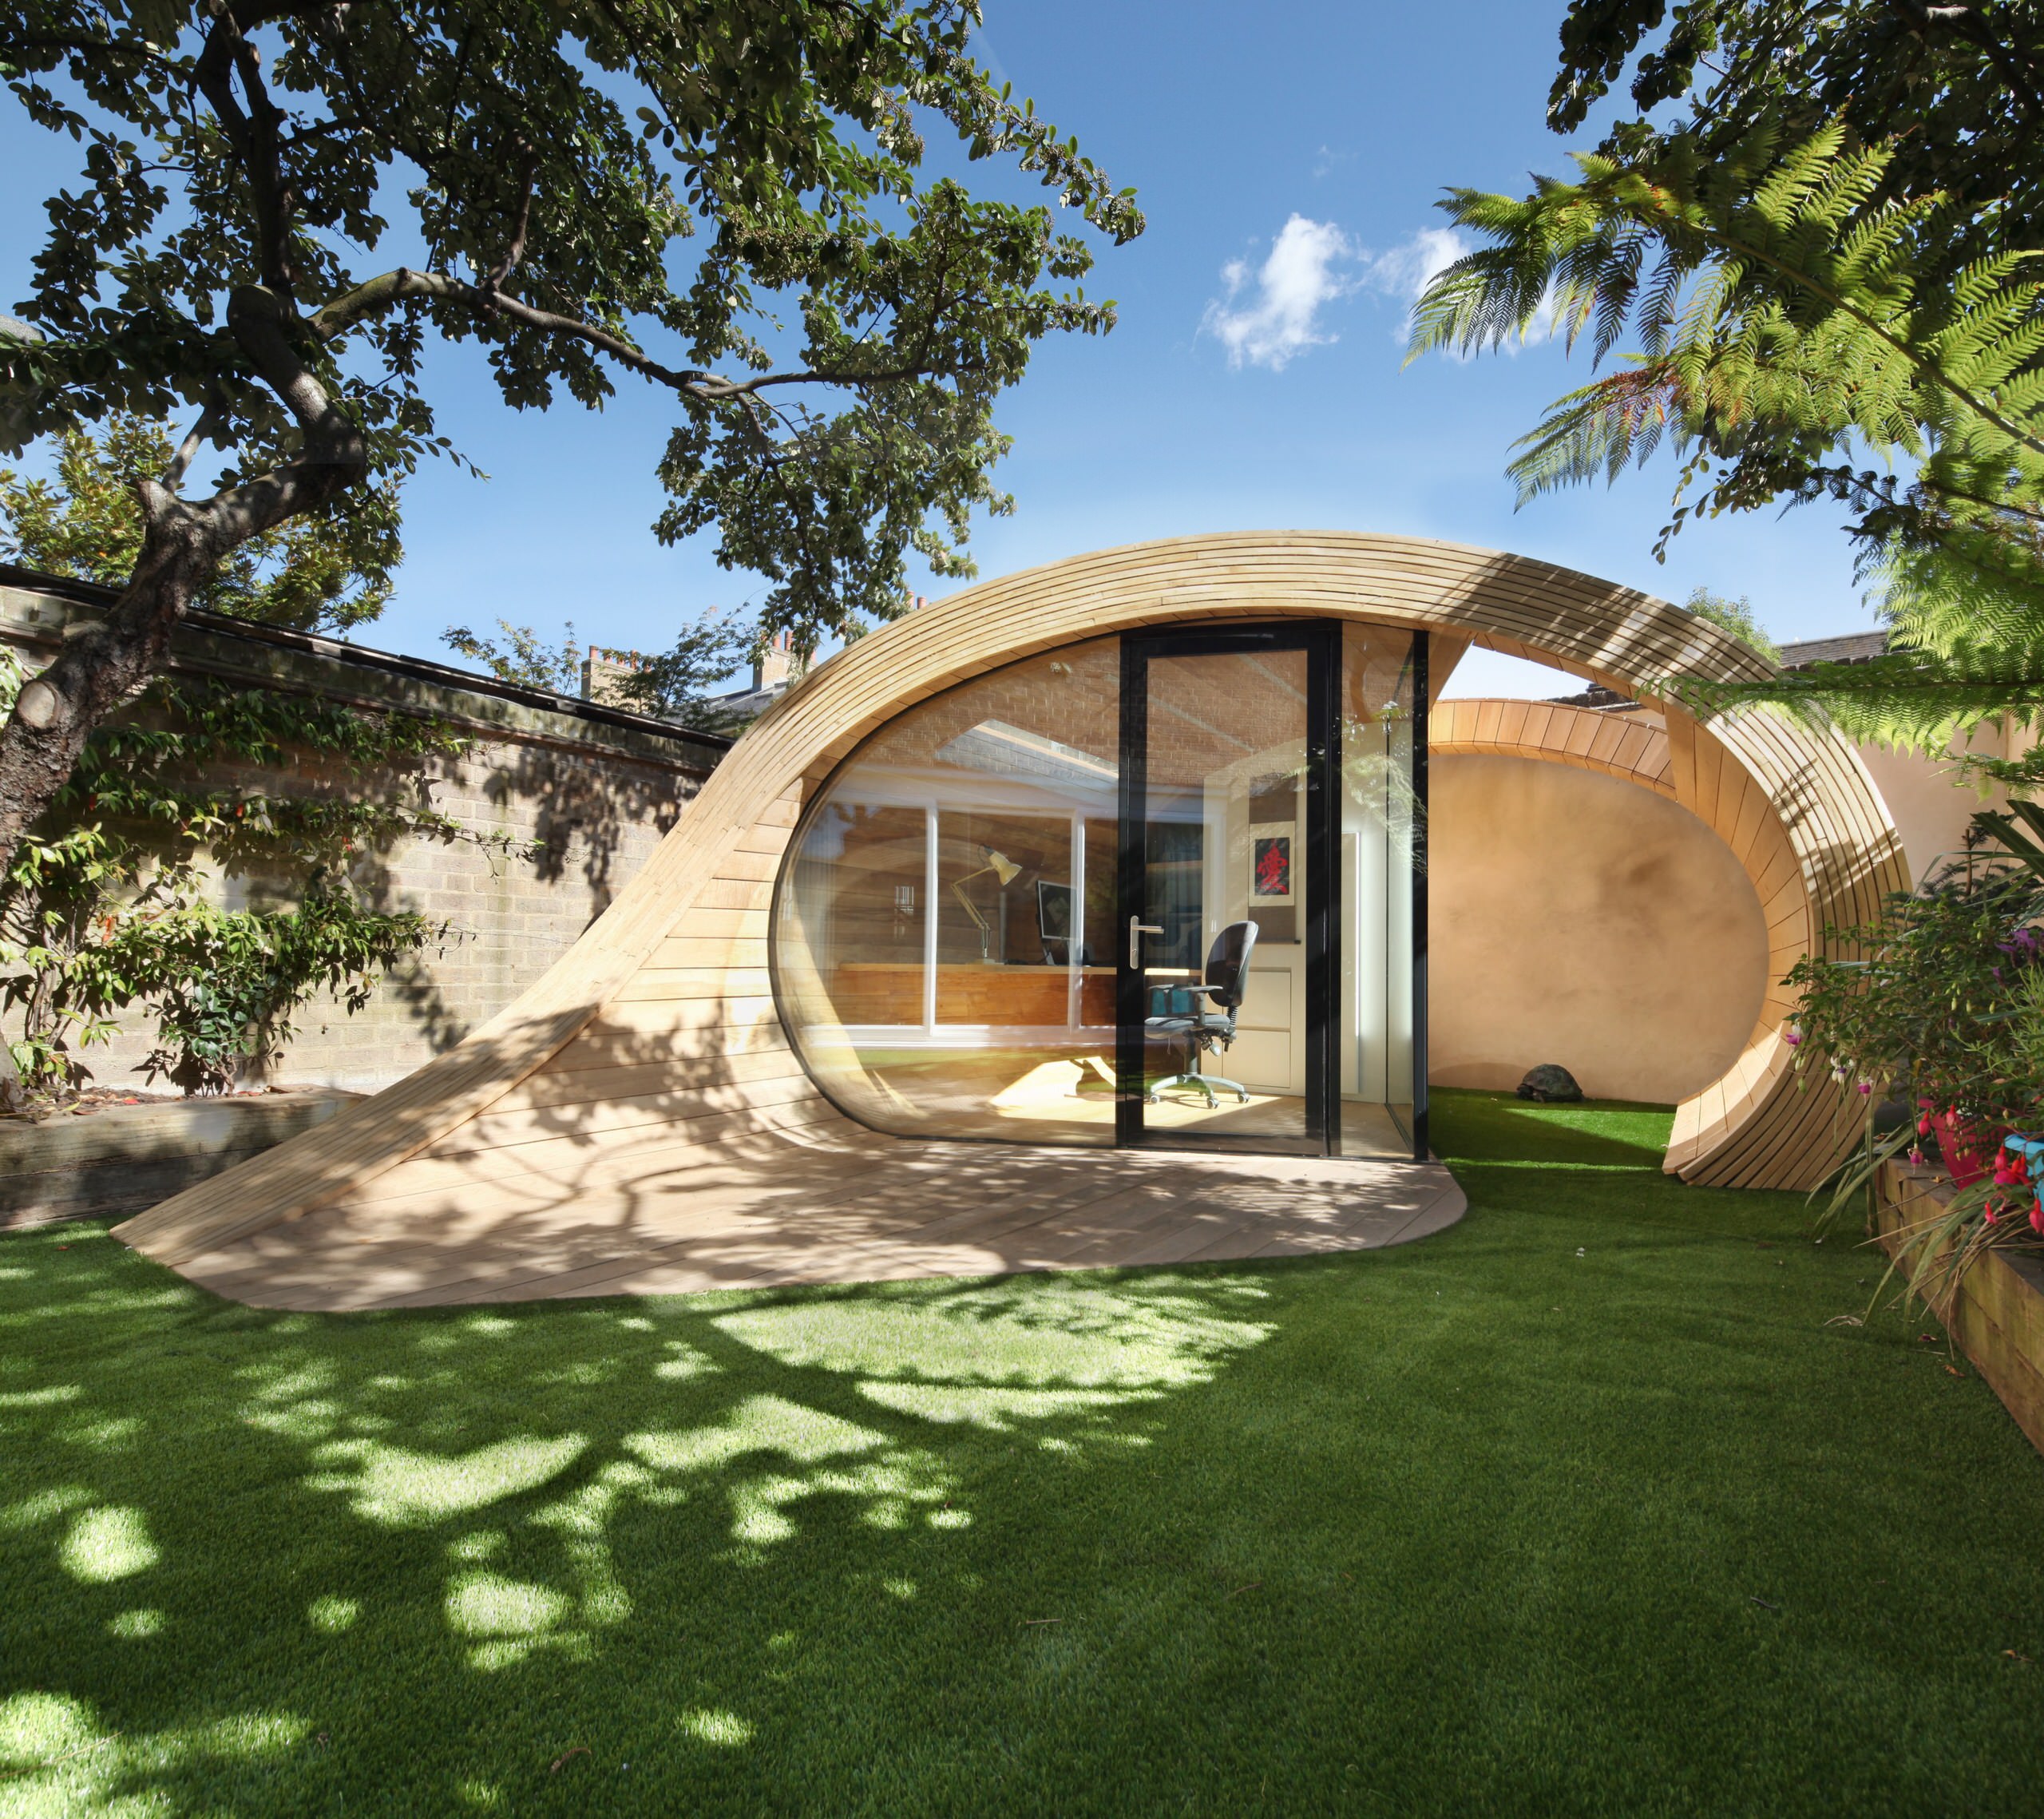 Style Uk Quirky Garden Rooms Sprout All Over The British Isles Houzz Au